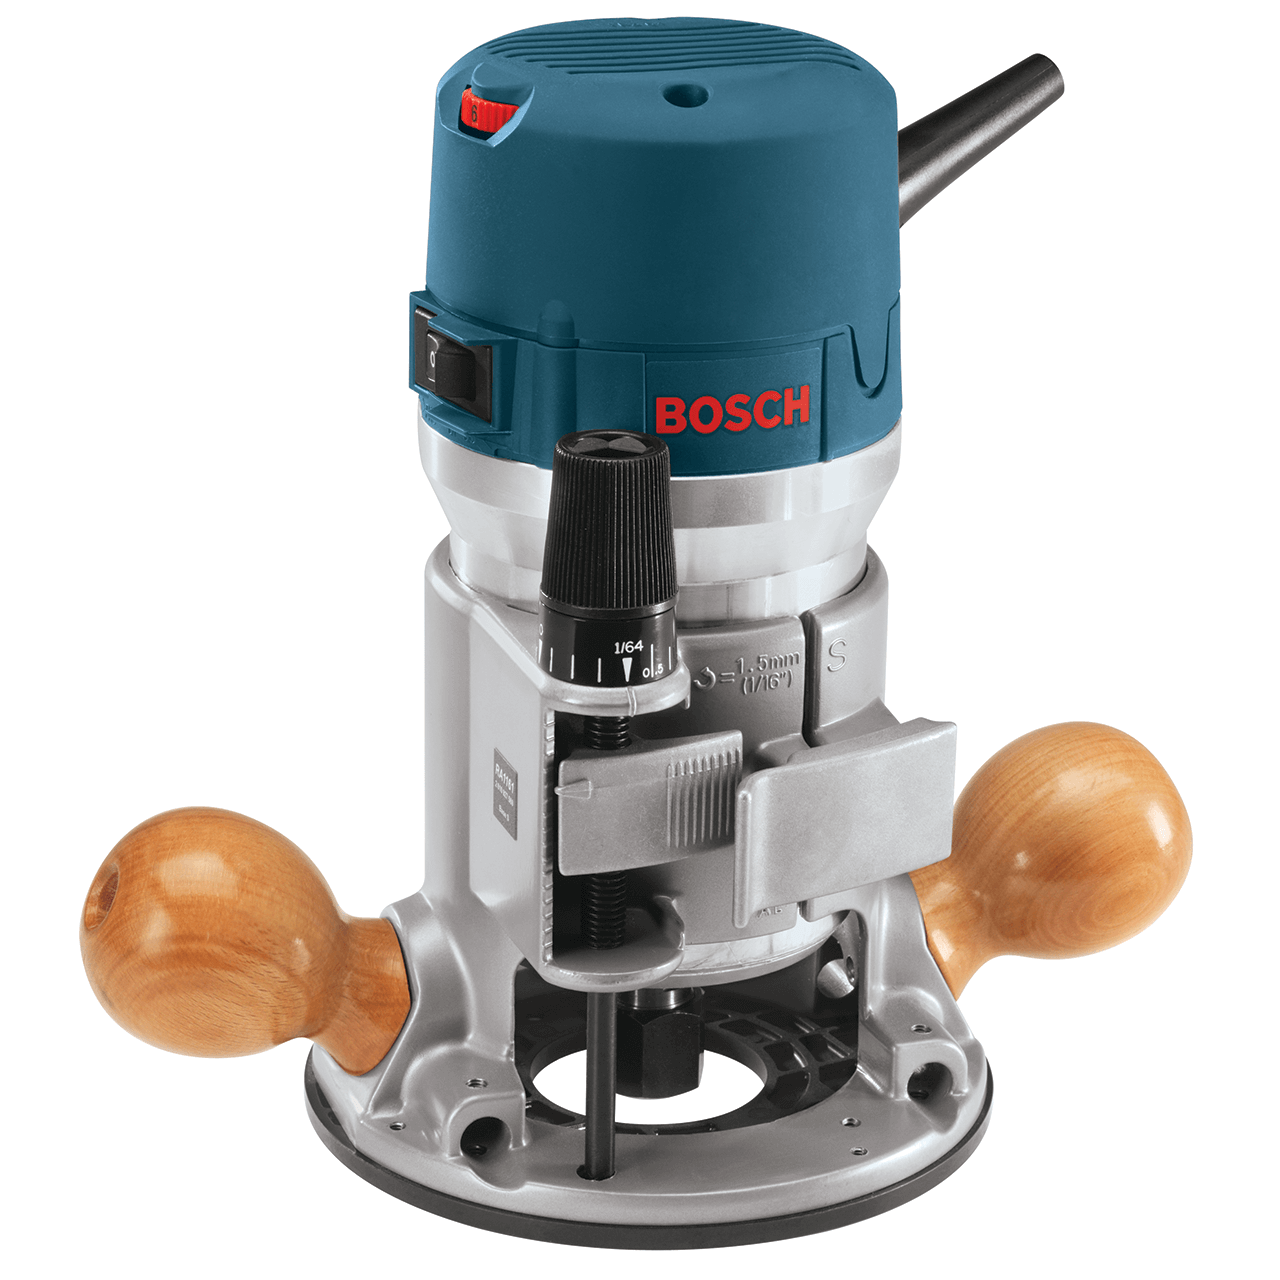 1618EVS - 2-1/4 HP Electronic Fixed Base D Handle Router